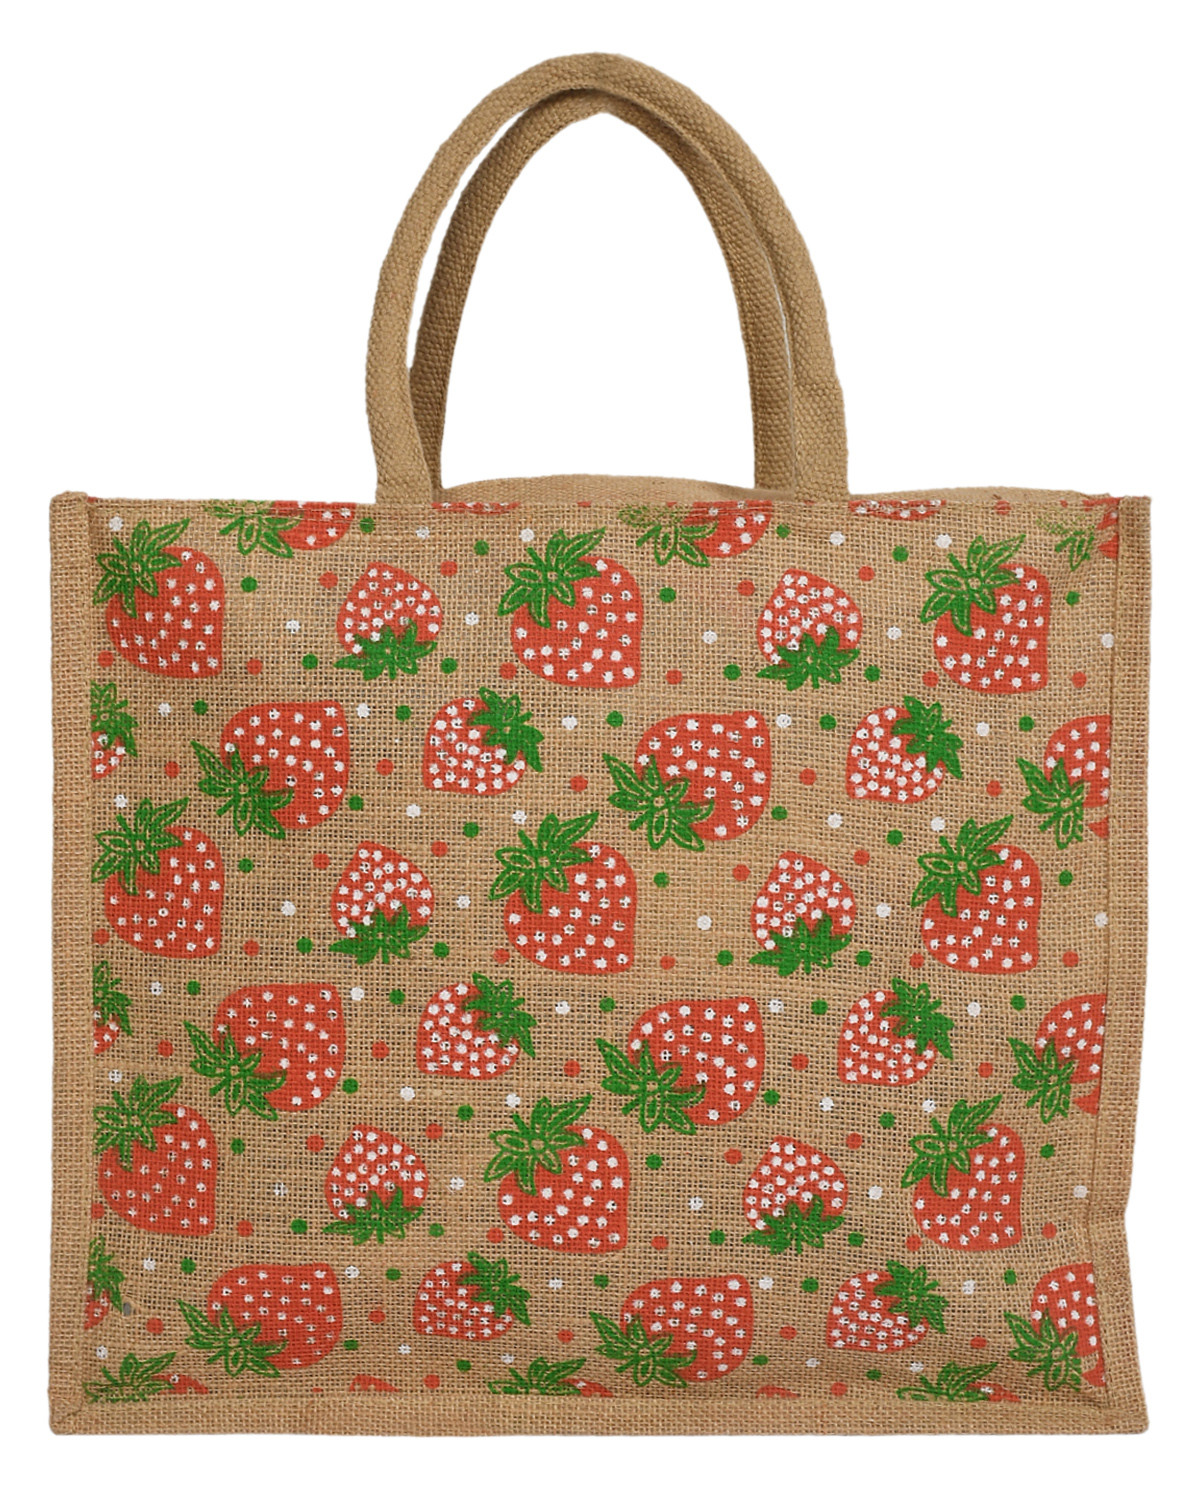 Kuber Industries Strawberry Print Jute Reusable Eco-Friendly Hand Bag/Grocery Bag For Man, Woman With Handle (Brown and Red) 54KM4369